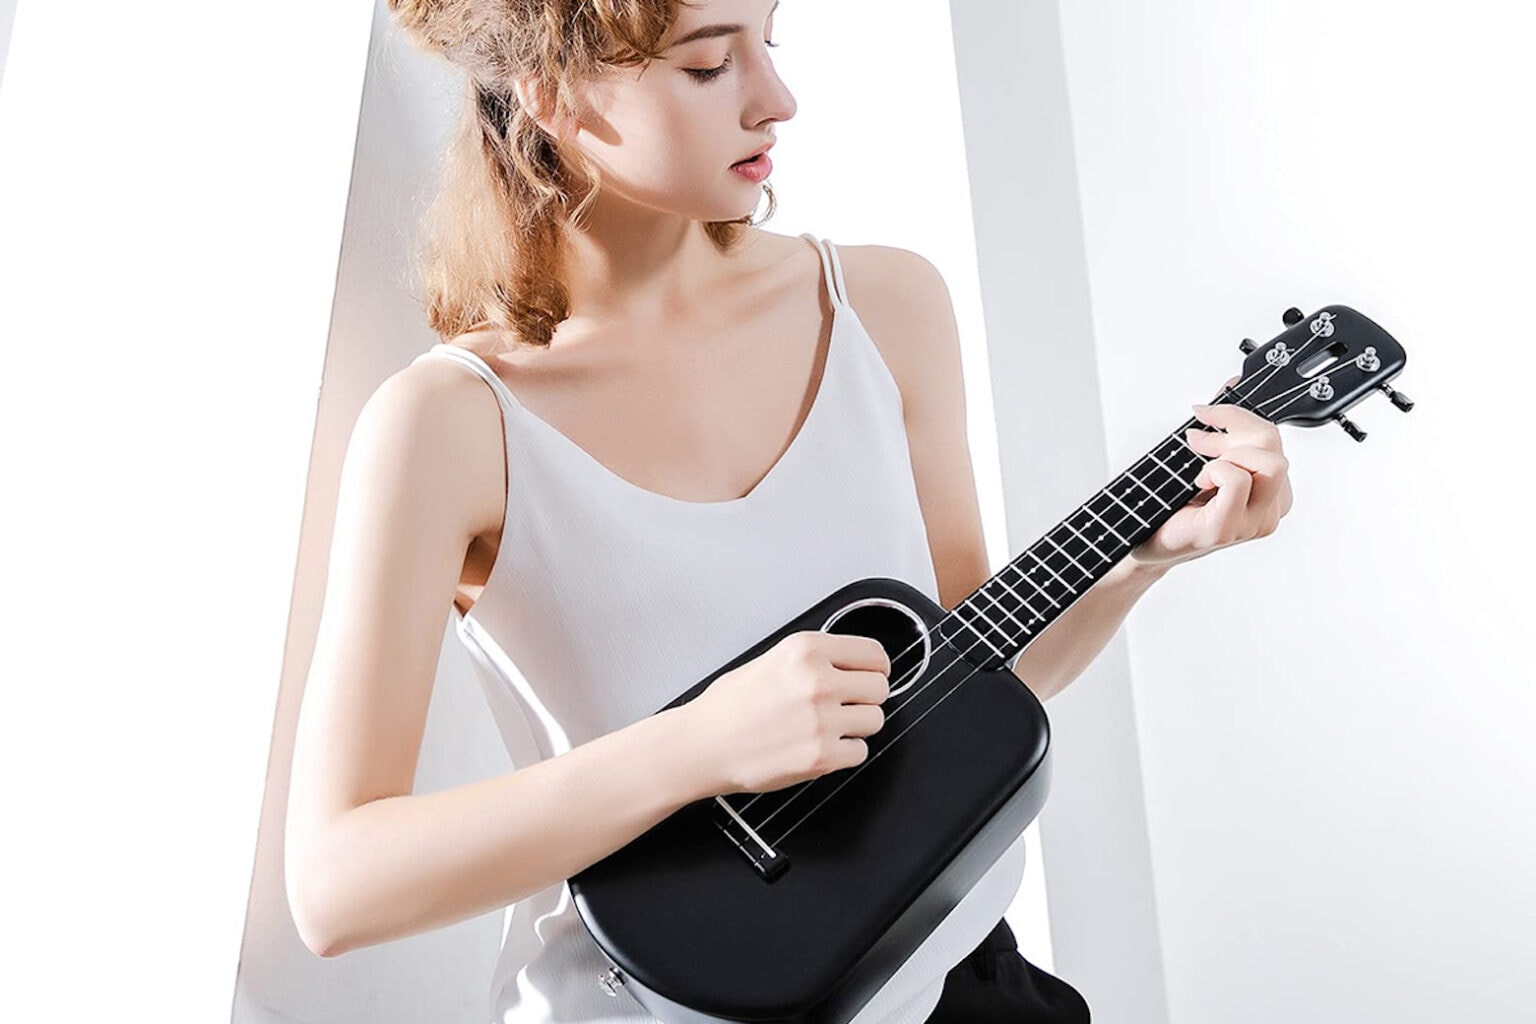 Let this smart ukulele teach you how to play for less than $160.